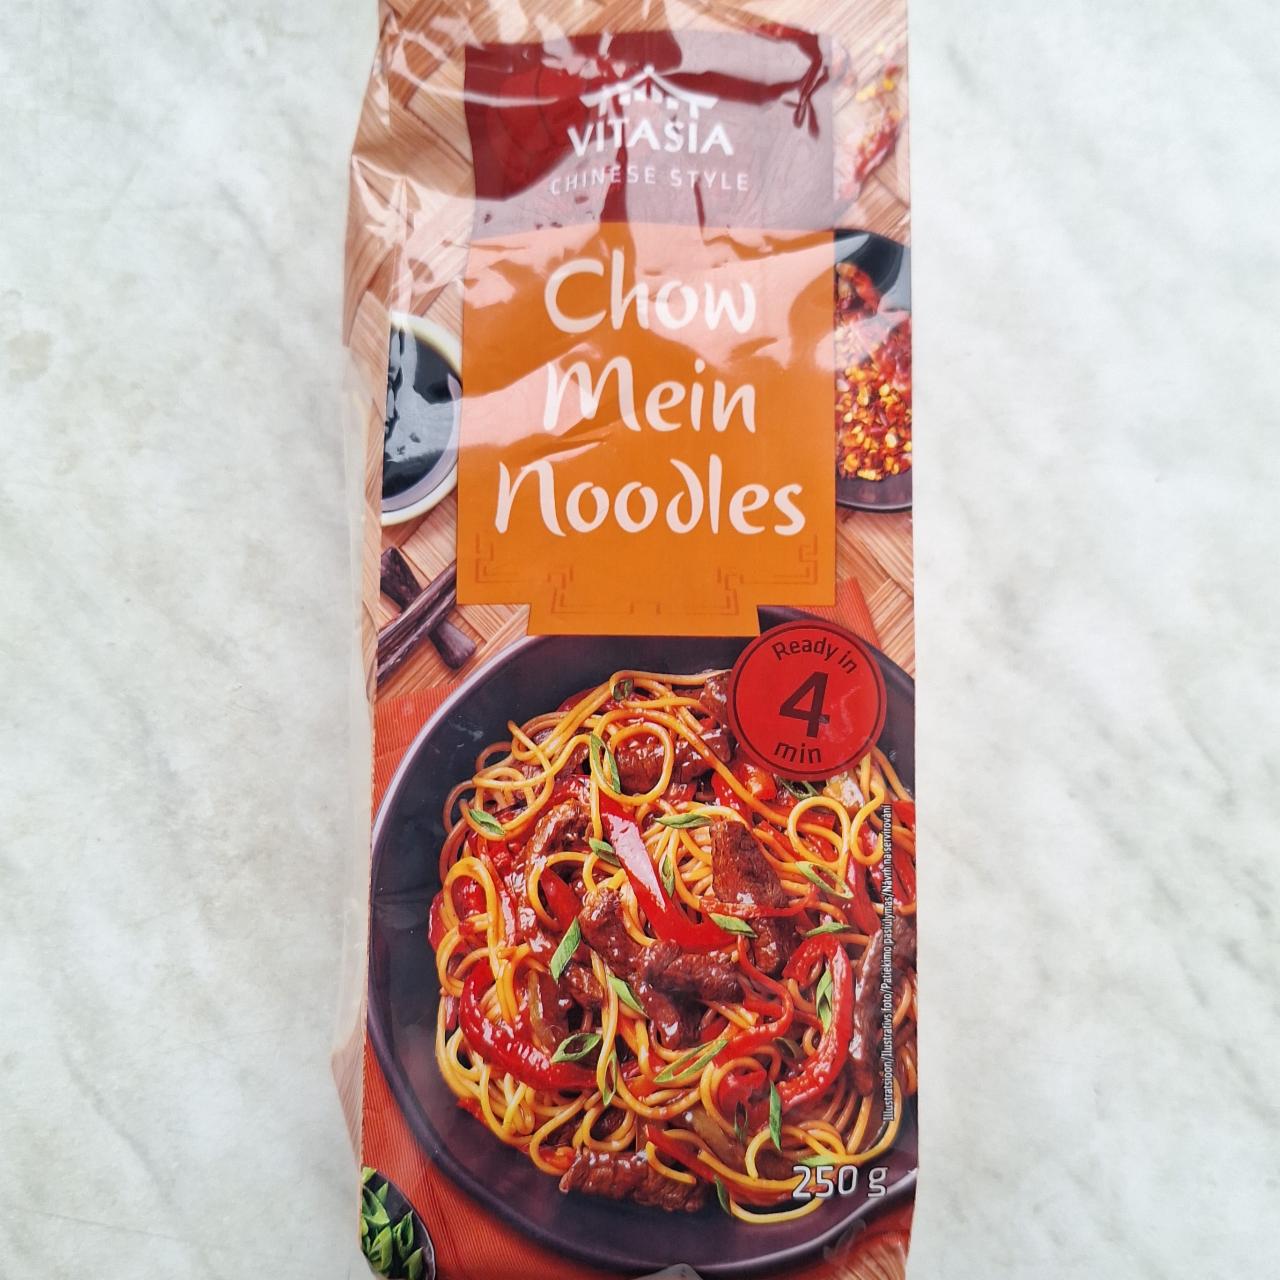 Fotografie - Chow Mein Noodles Chinese style Vitasia